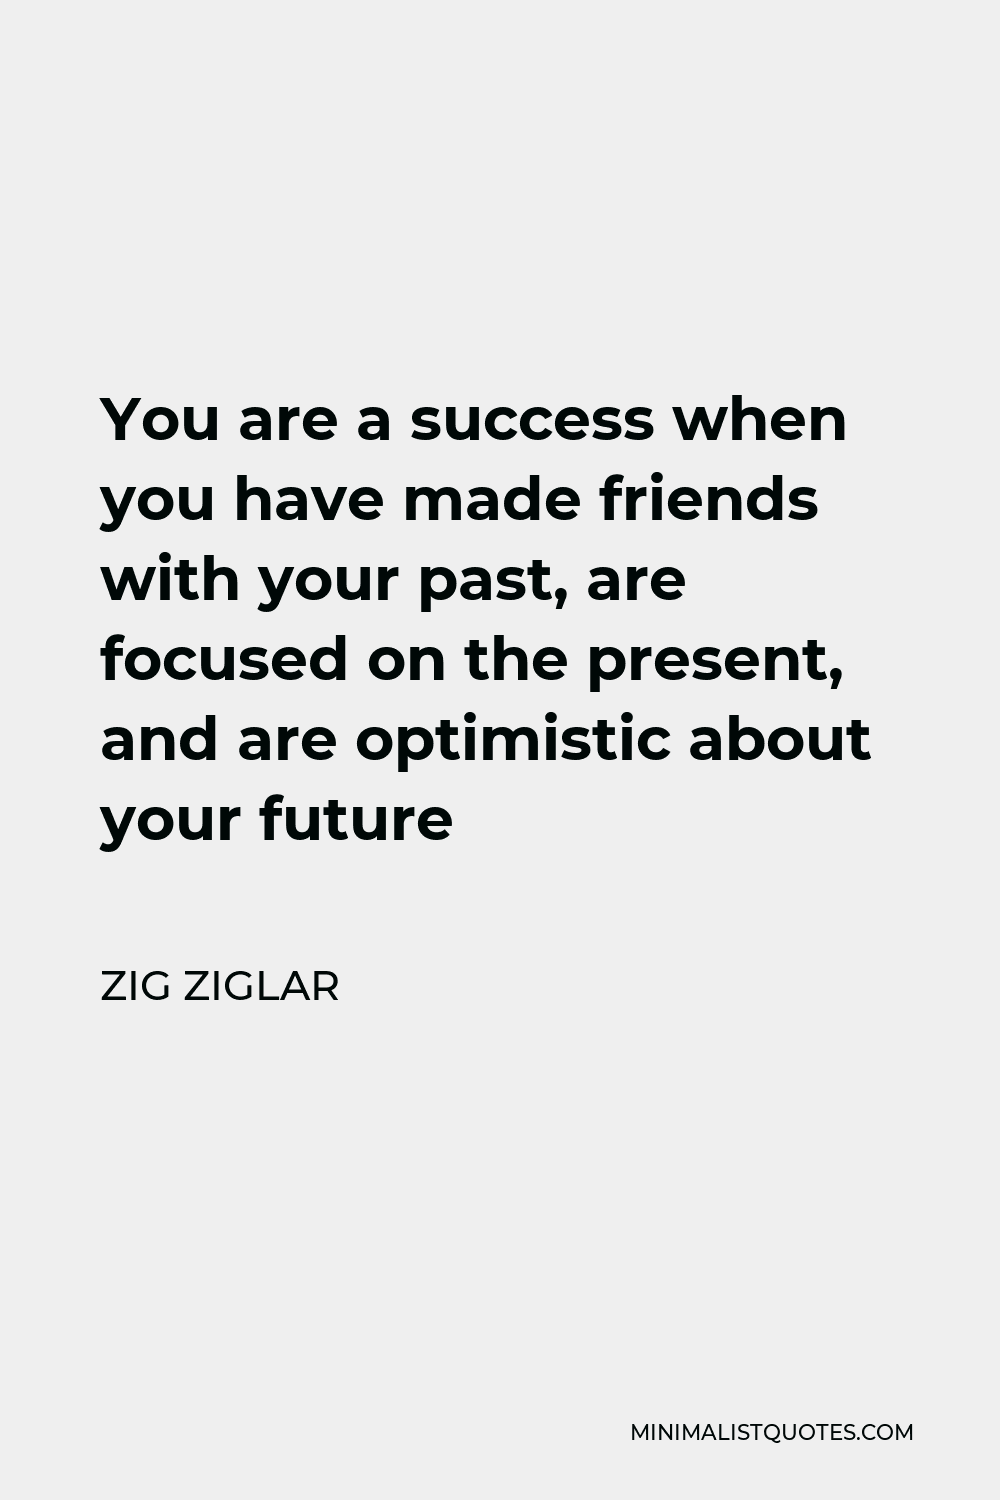 Zig Ziglar Quote - You are a success when you have made friends with your past, are focused on the present, and are optimistic about your future